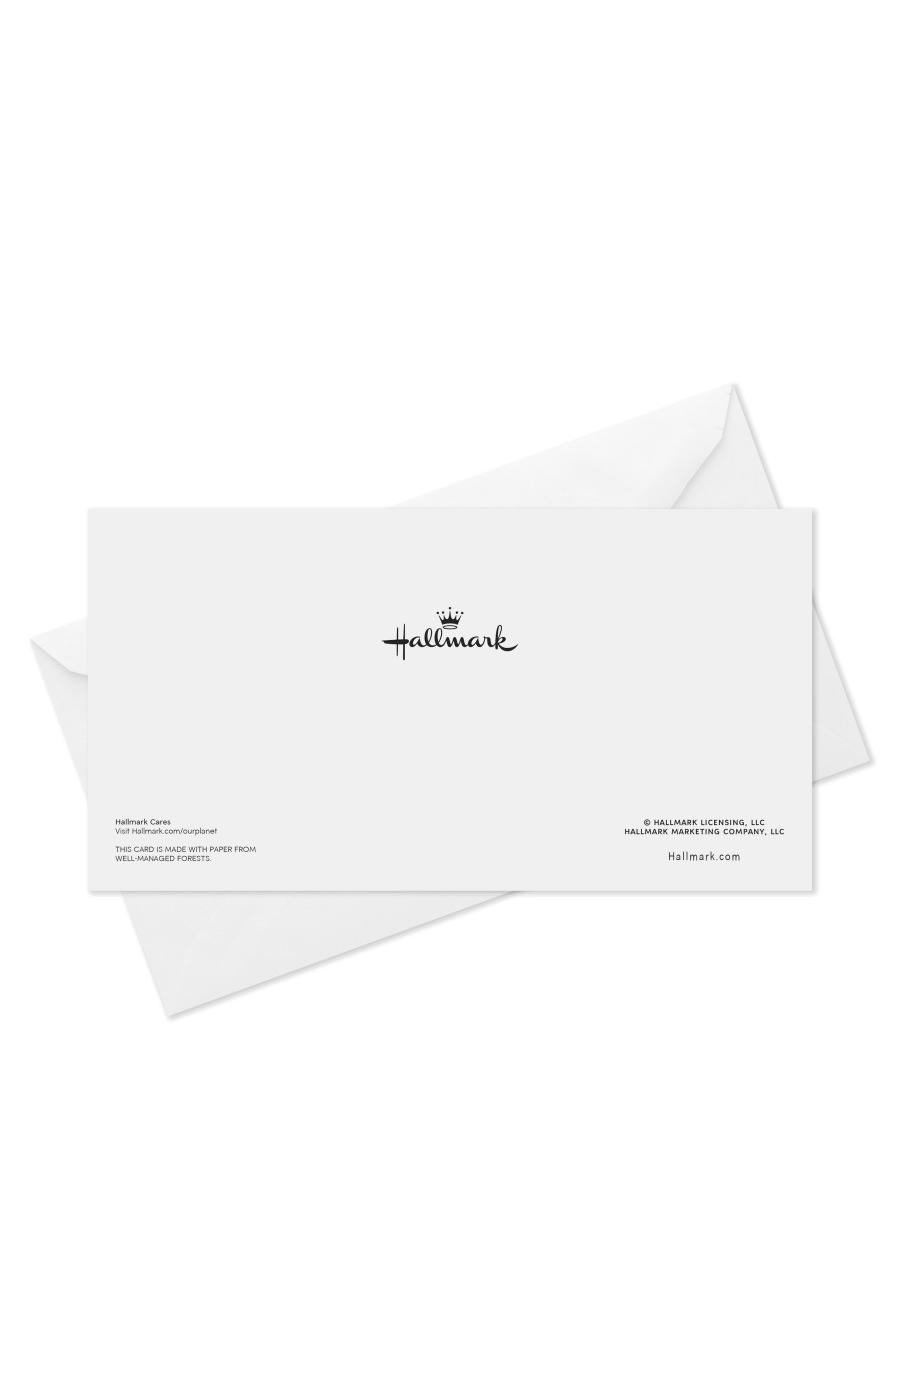 Hallmark Gold Foil Congrats Grad Money Holders or Gift Card Holders with Envelopes - S31, S16; image 2 of 6